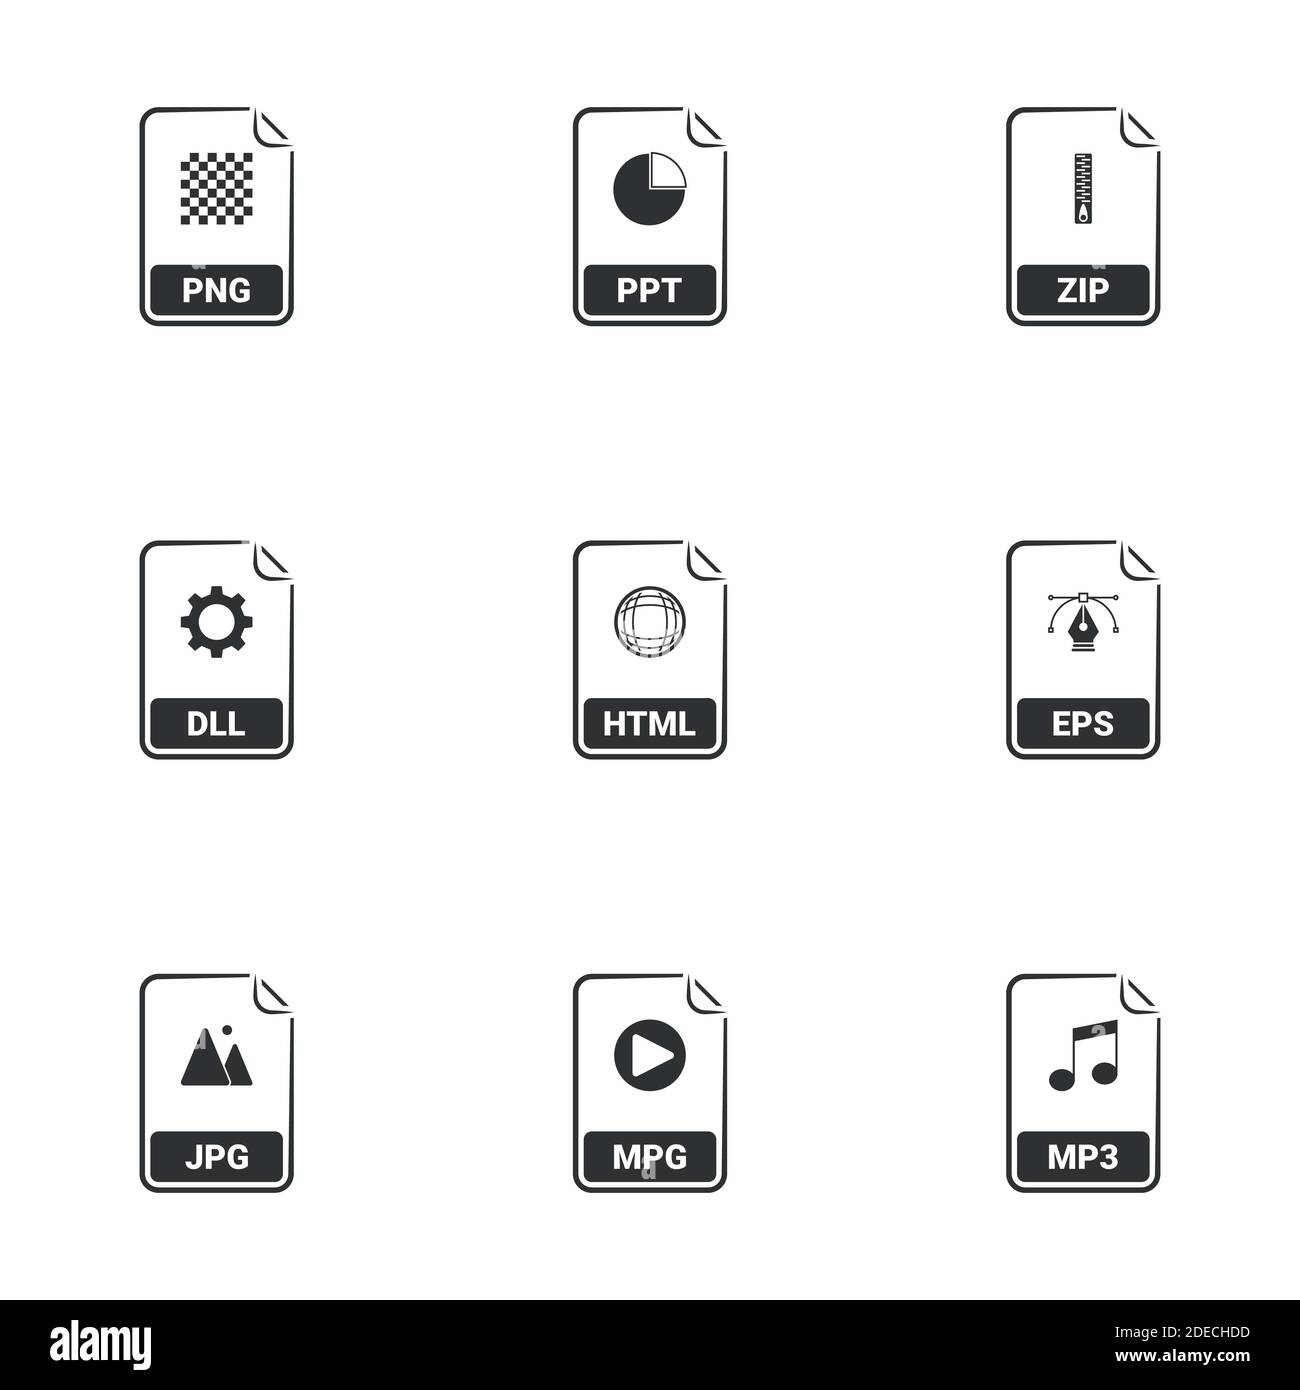 File Types icons.White background Stock Vector